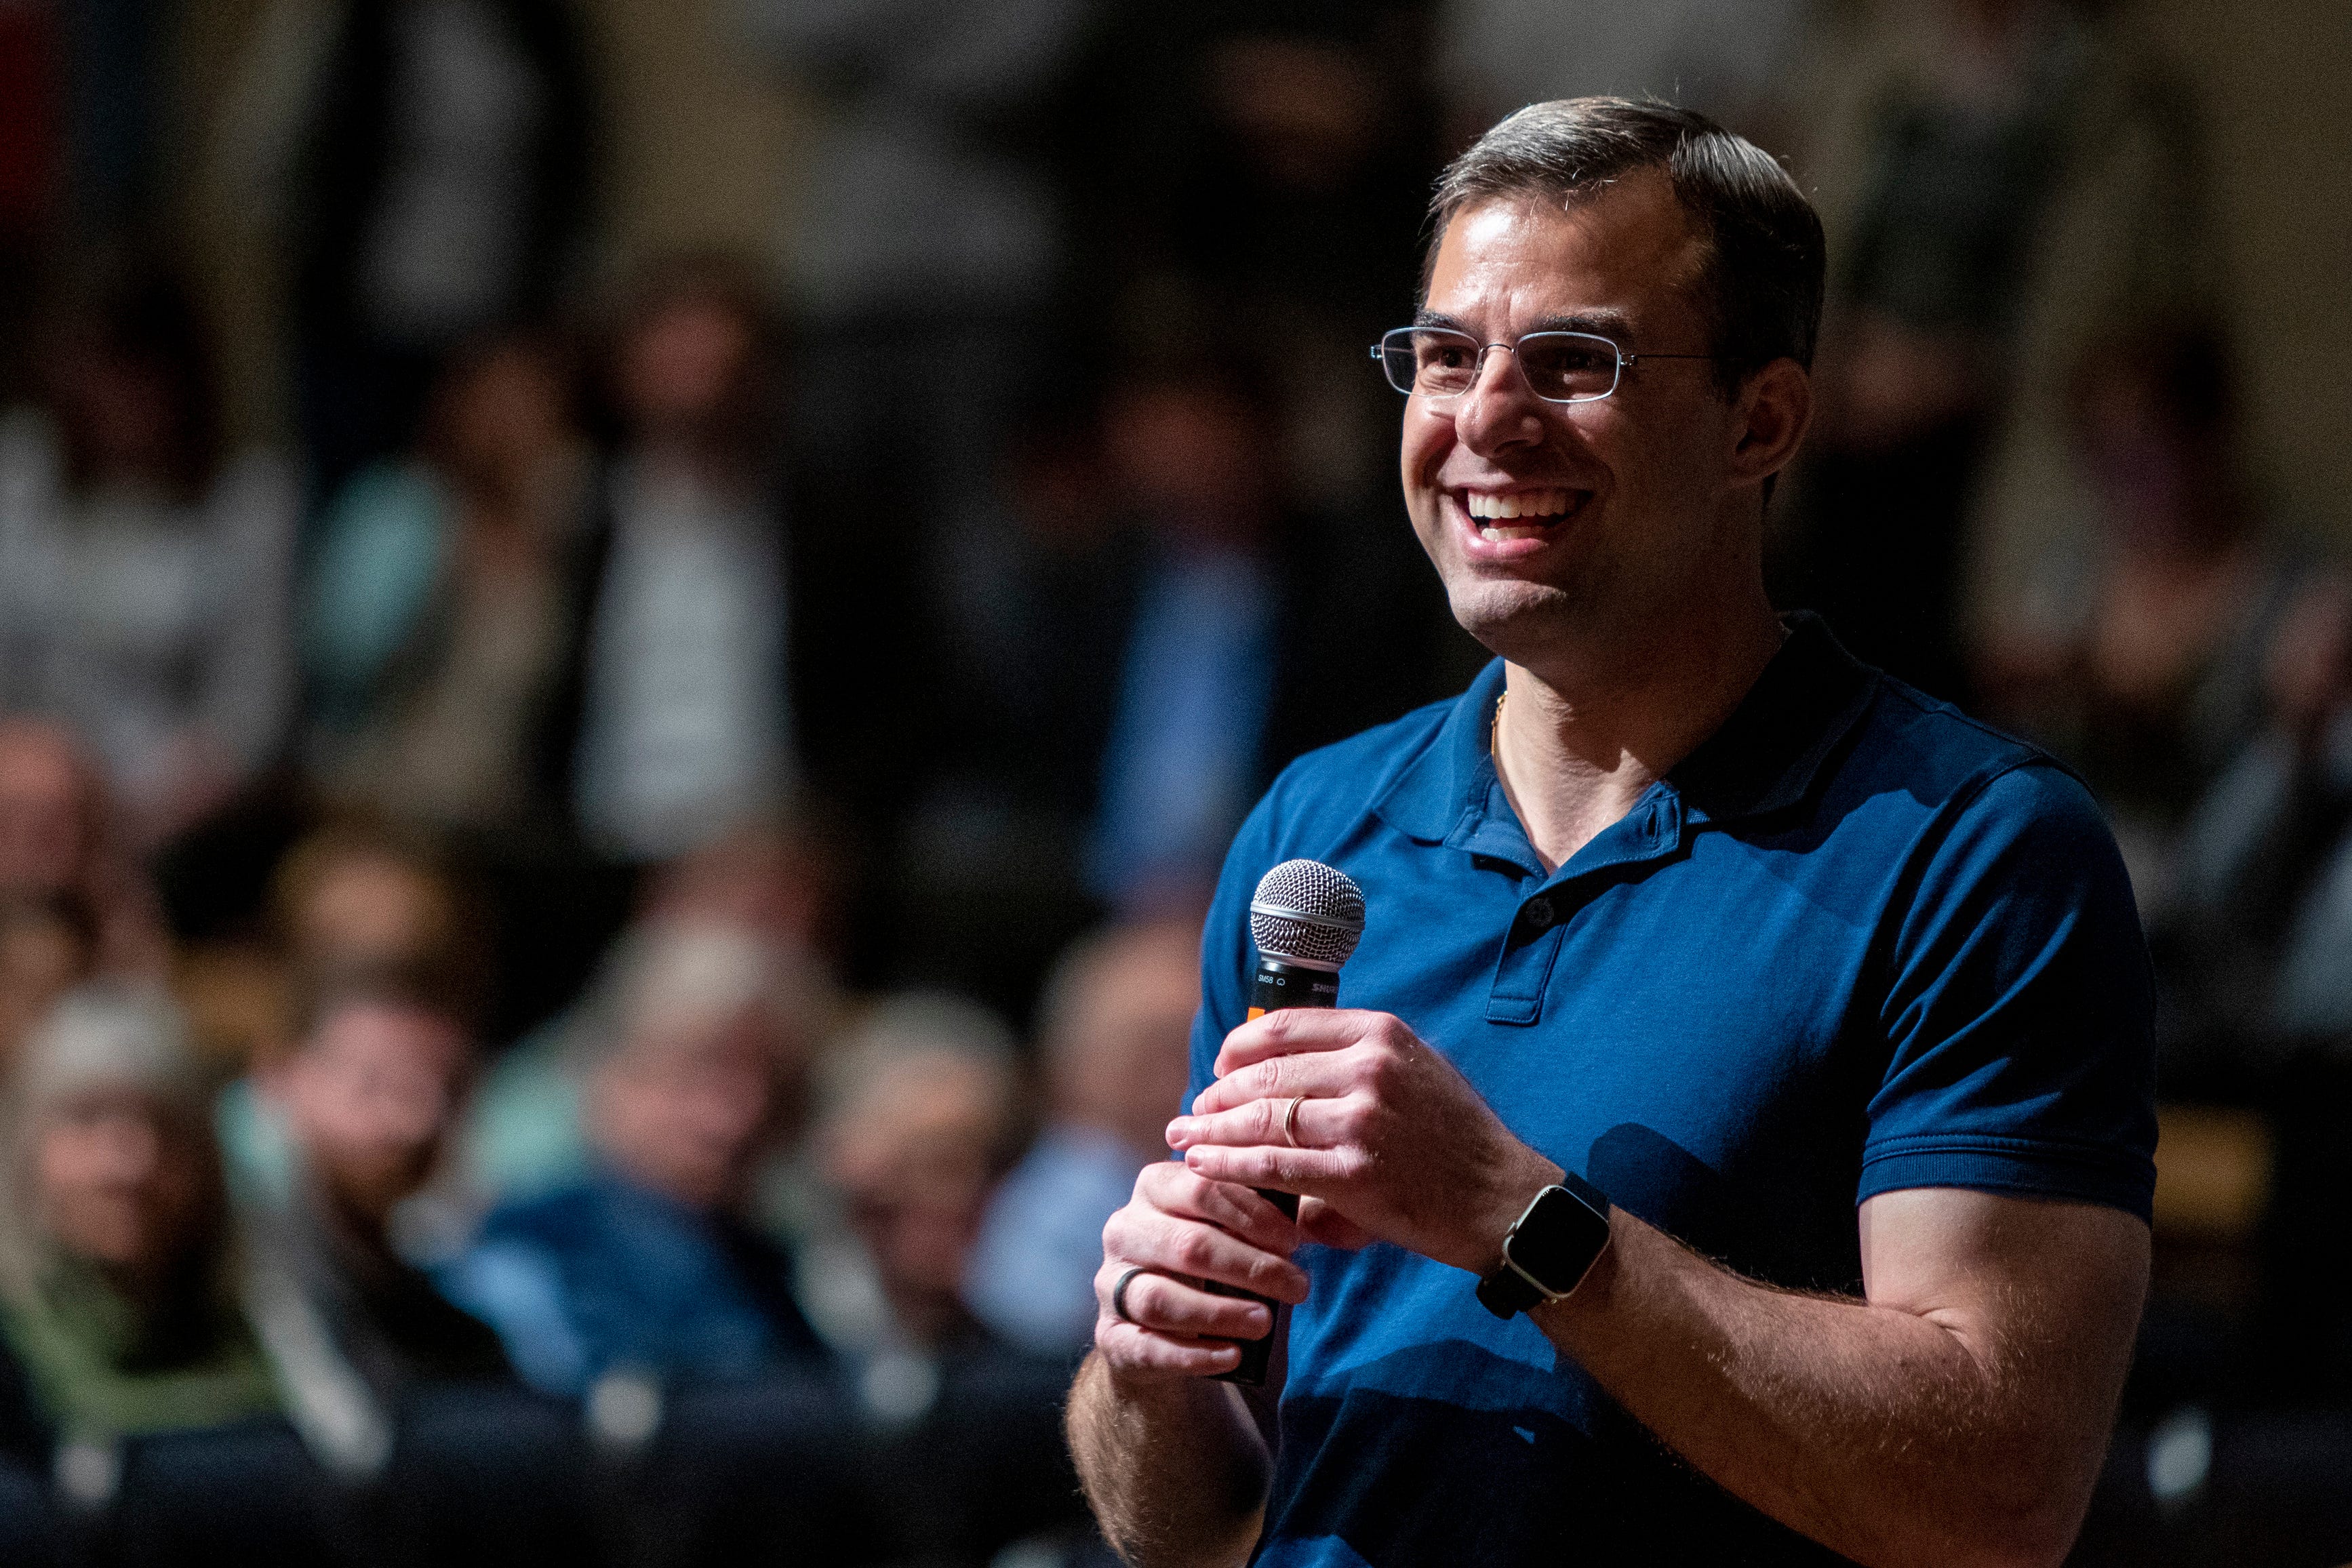 U.S. Rep. Justin Amash, R-Cascade Township, holds a town hall meeting at Grand Rapids Christian High School's DeVos Center for Arts and Worship on Tuesday, May 28, 2019.